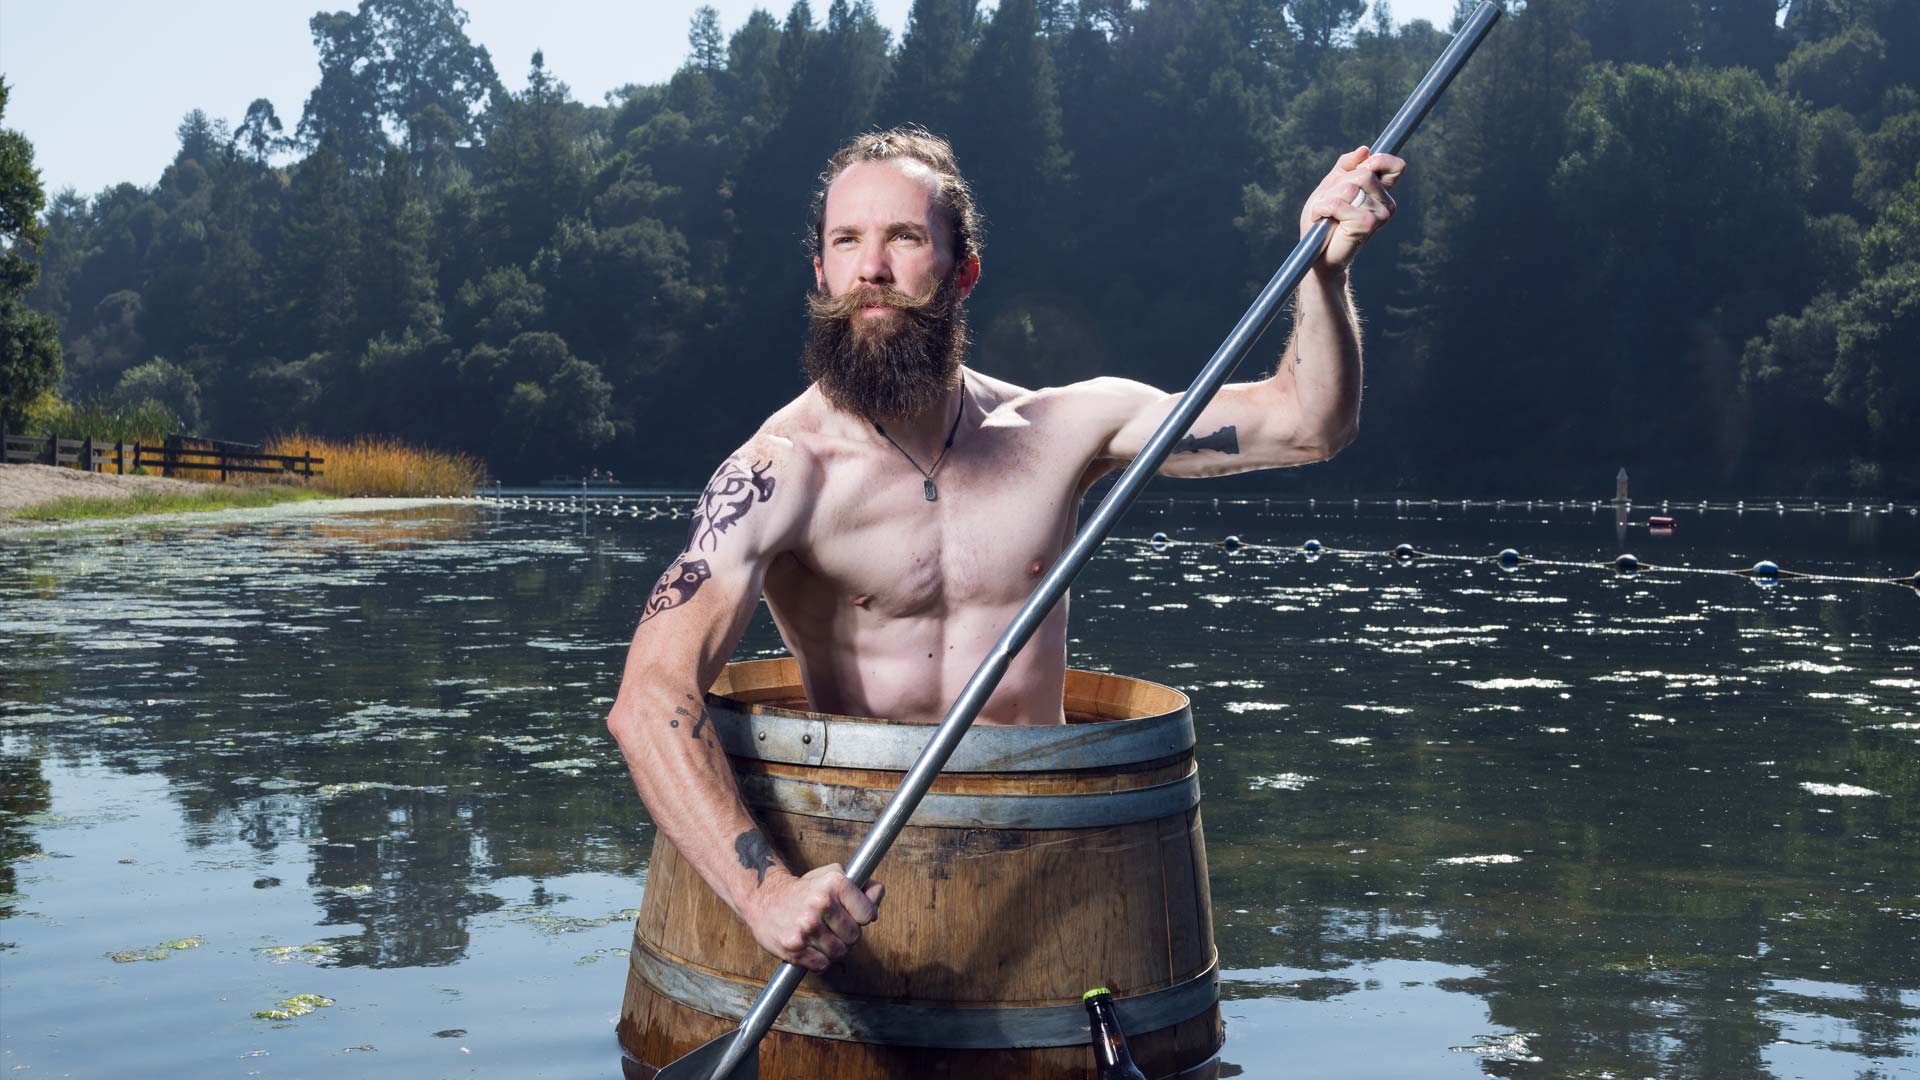 Brewer Chris seated and paddling in a beer barrel floating in a pond